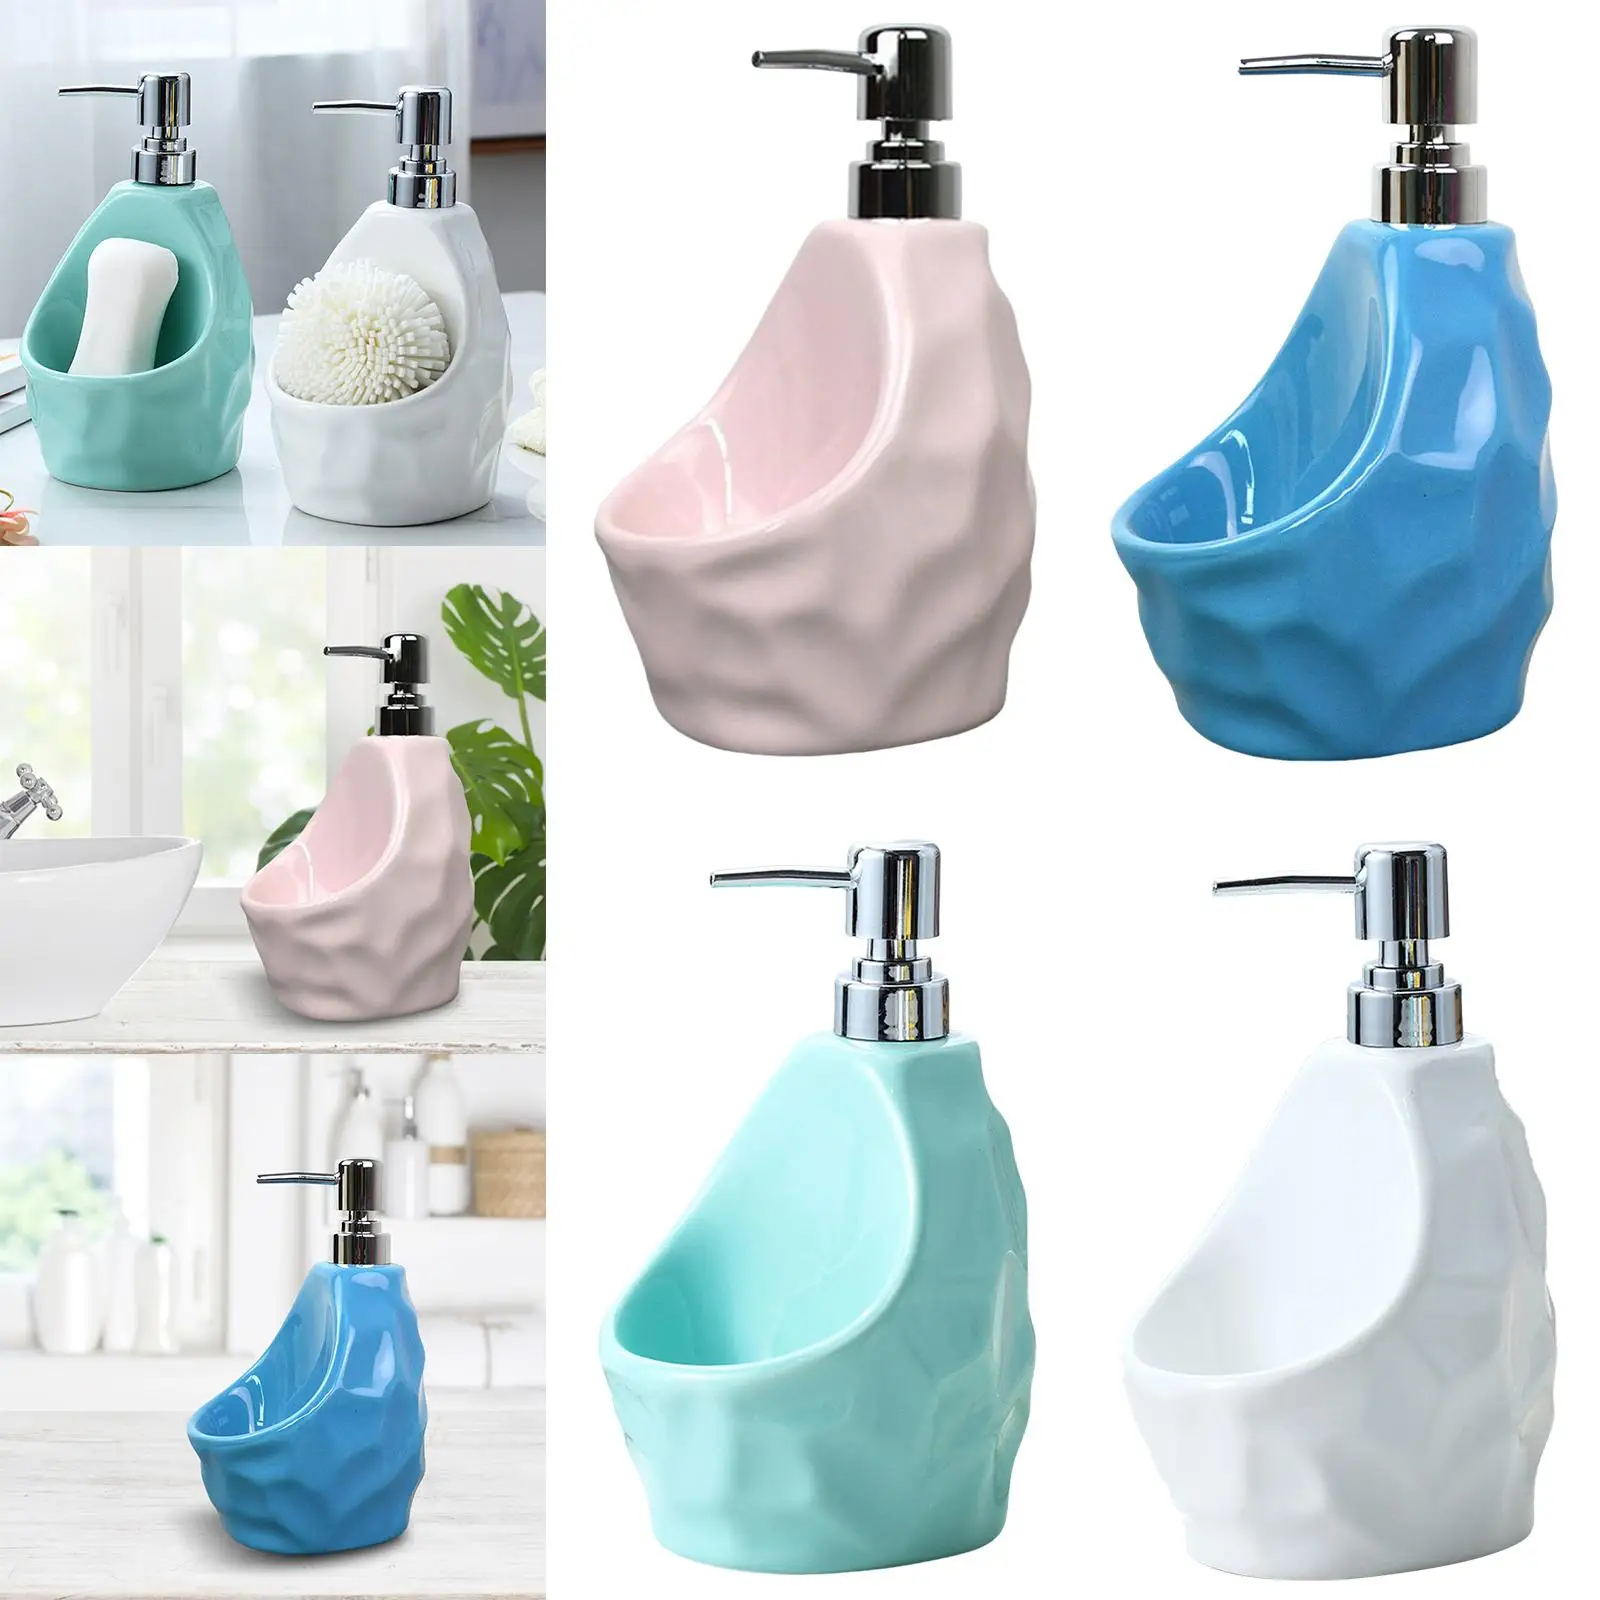 Soap Dispenser Refillable Kitchen Accessories Holder Pump Bottle for Lotion Hand Soap Body Wash Essential Oil Sink Countertop